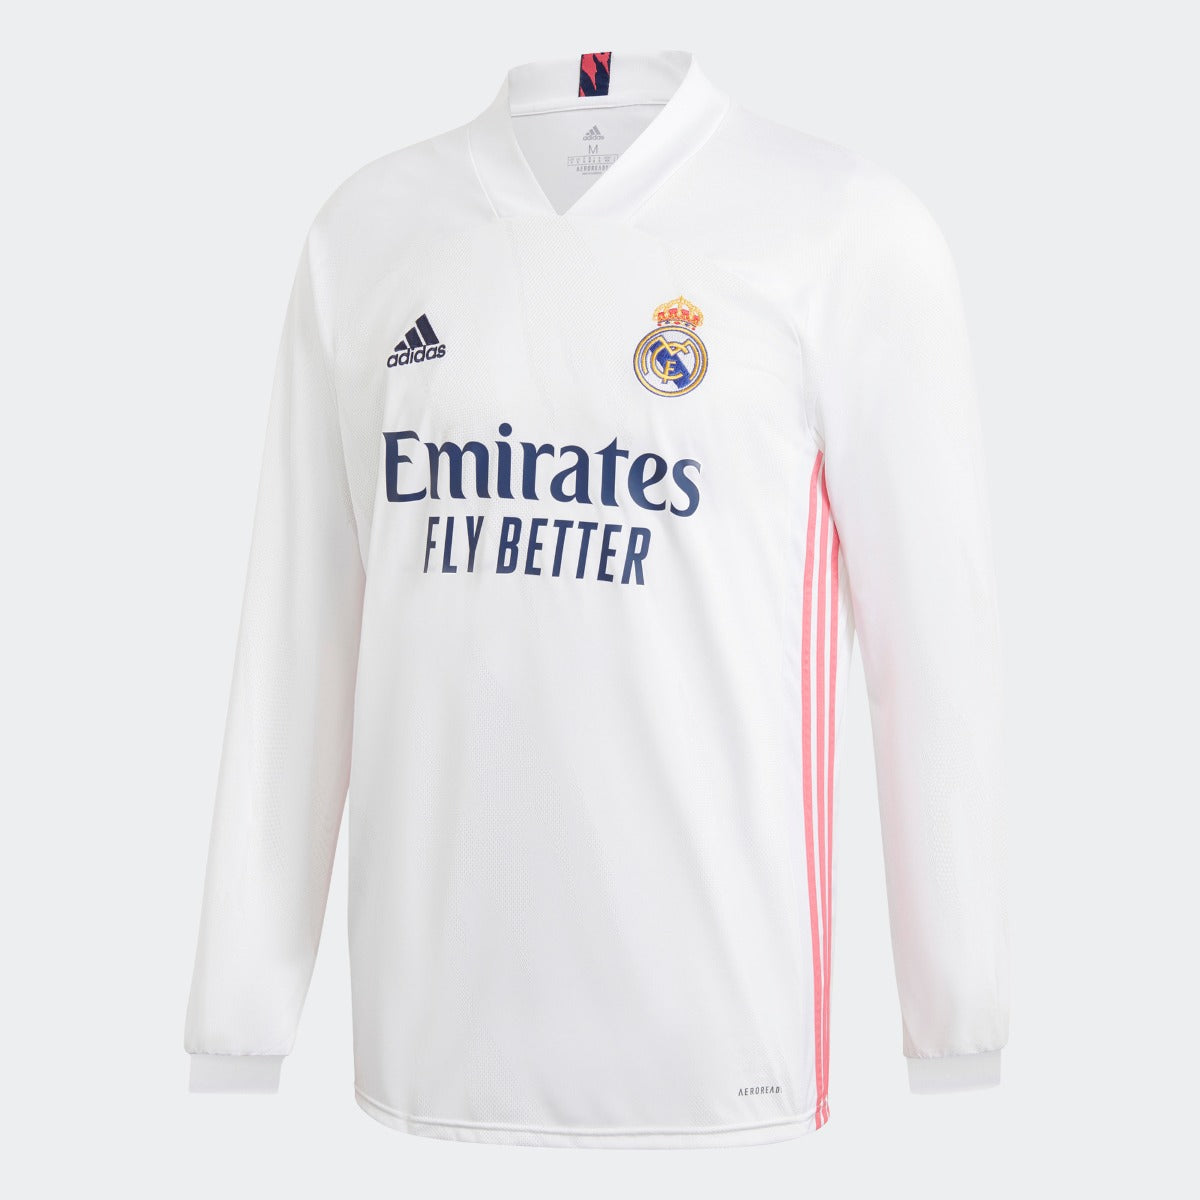 Adidas 2020-21 Real Madrid Home Long-Sleeve Jersey - White-Pink